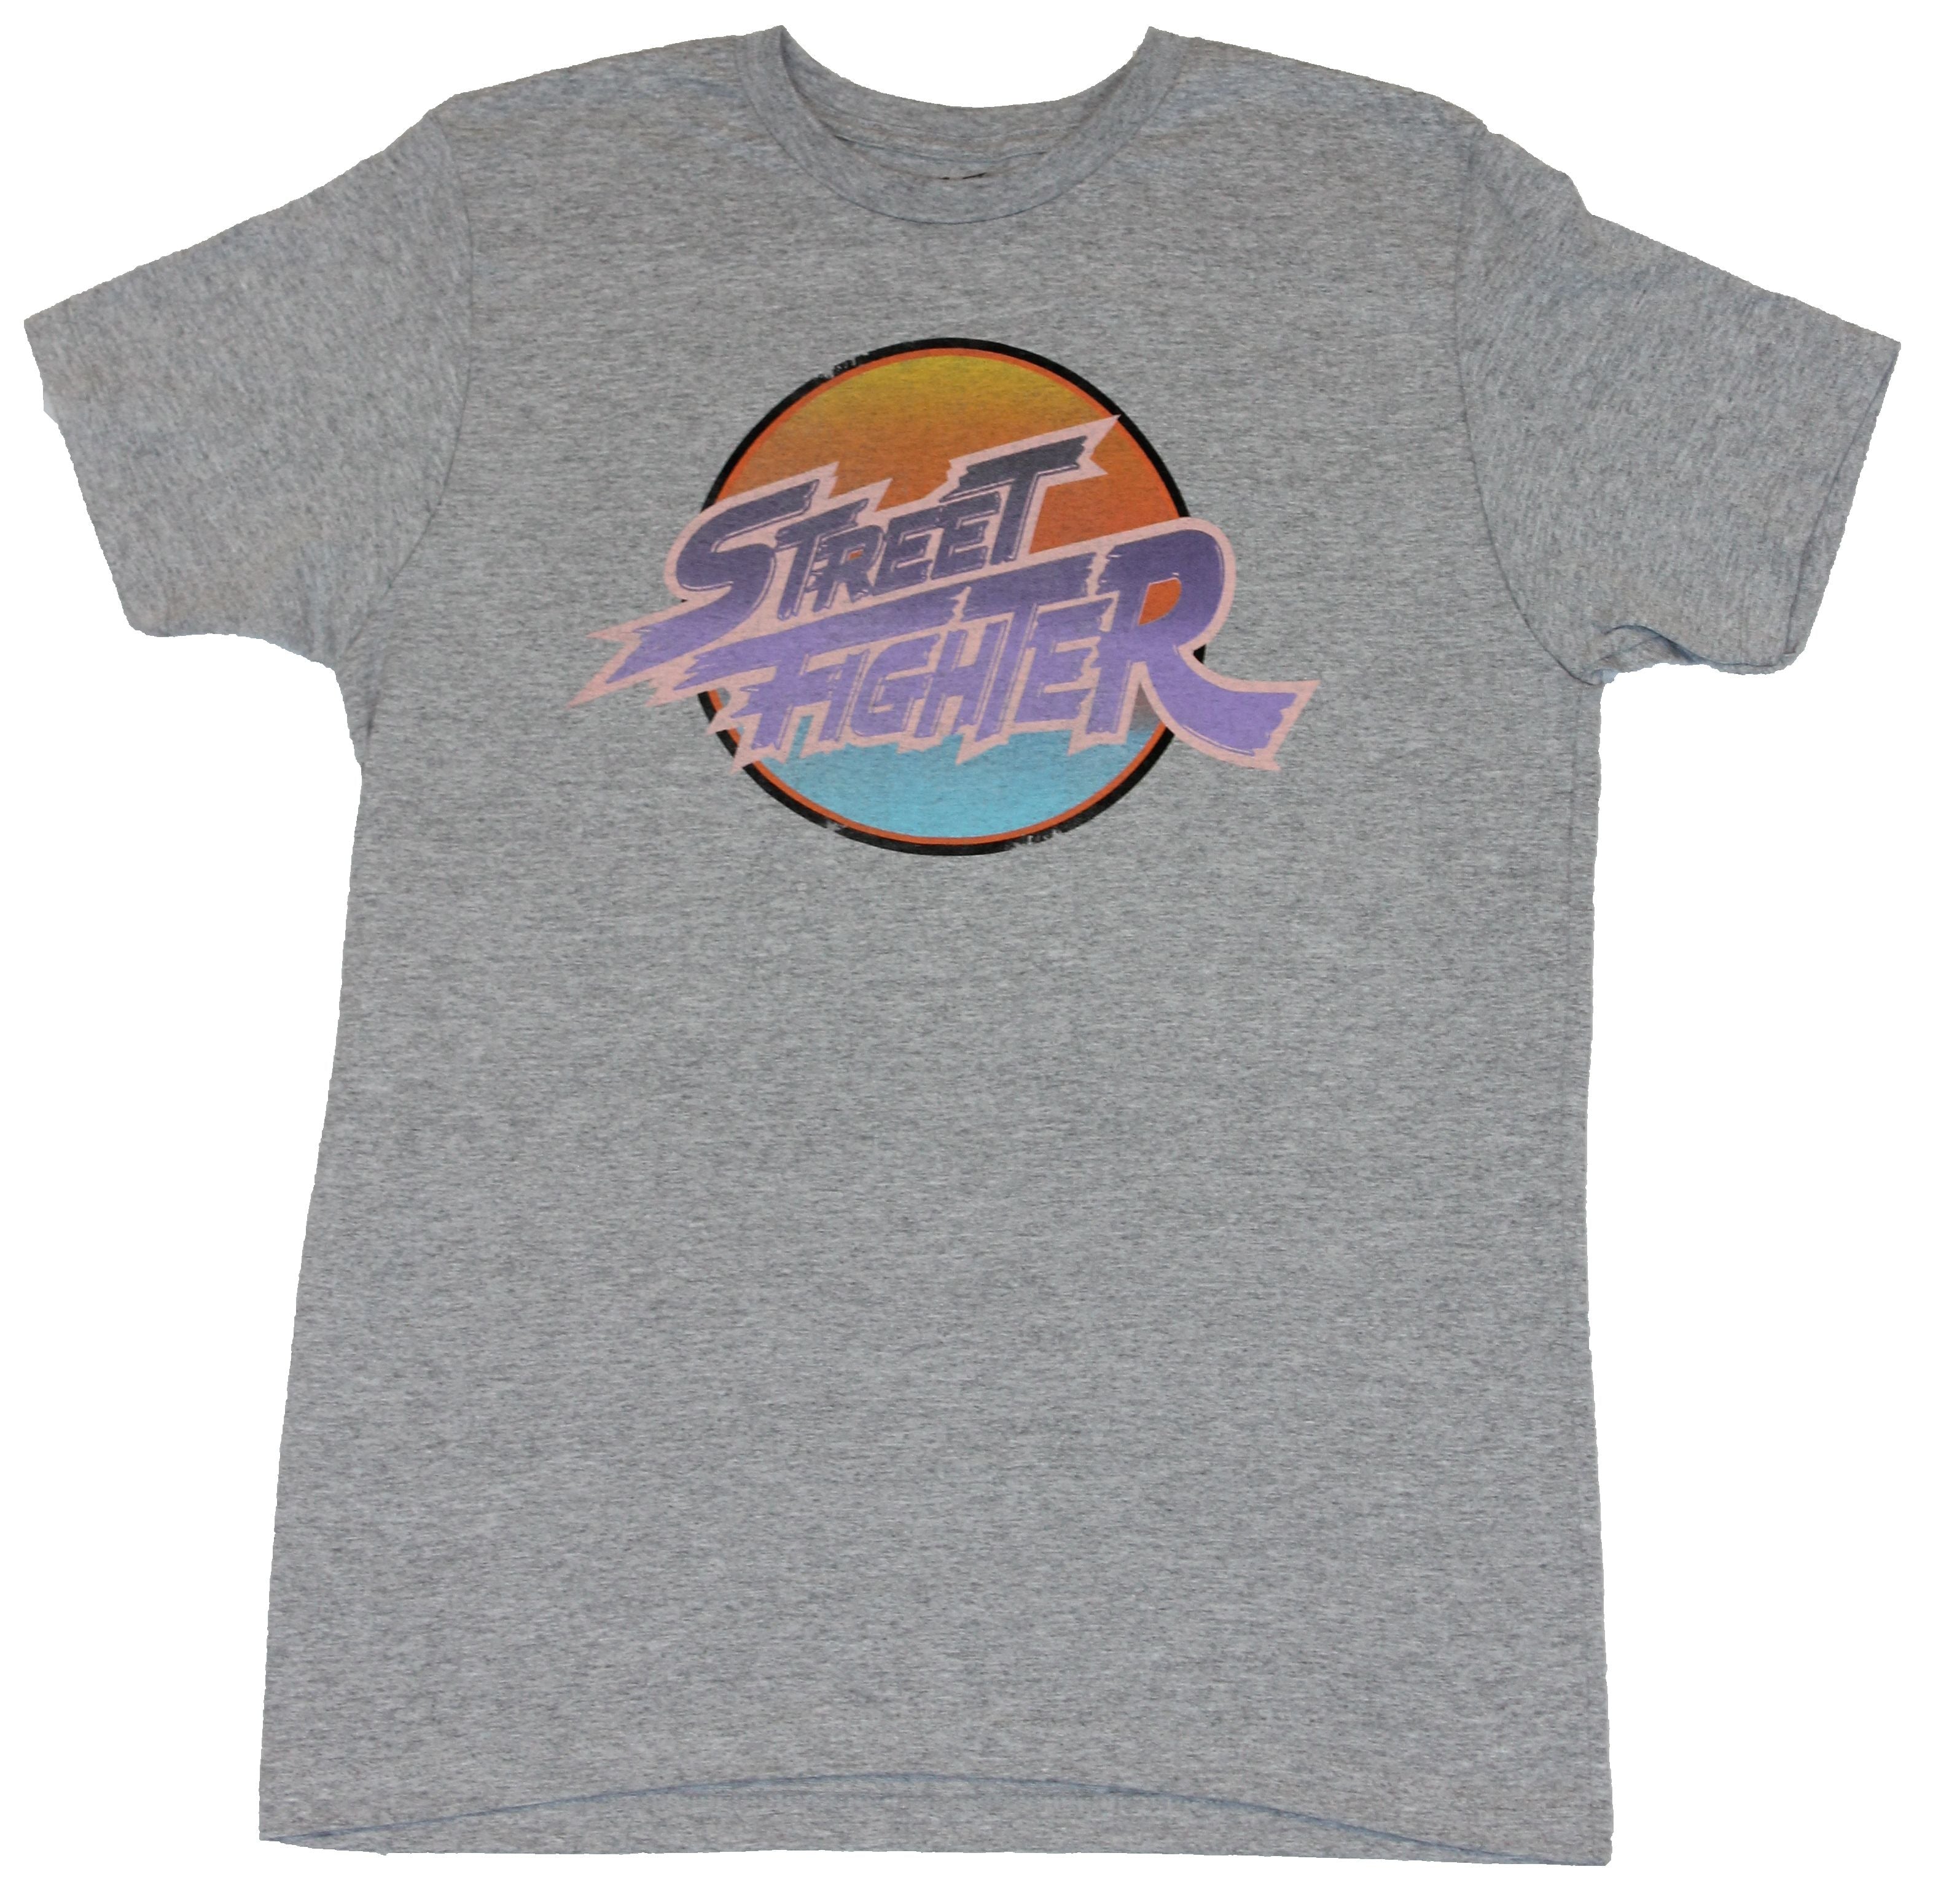 Street Fighter Mens T-Shirt - Classsic Pastel Colored Circle Logo Image